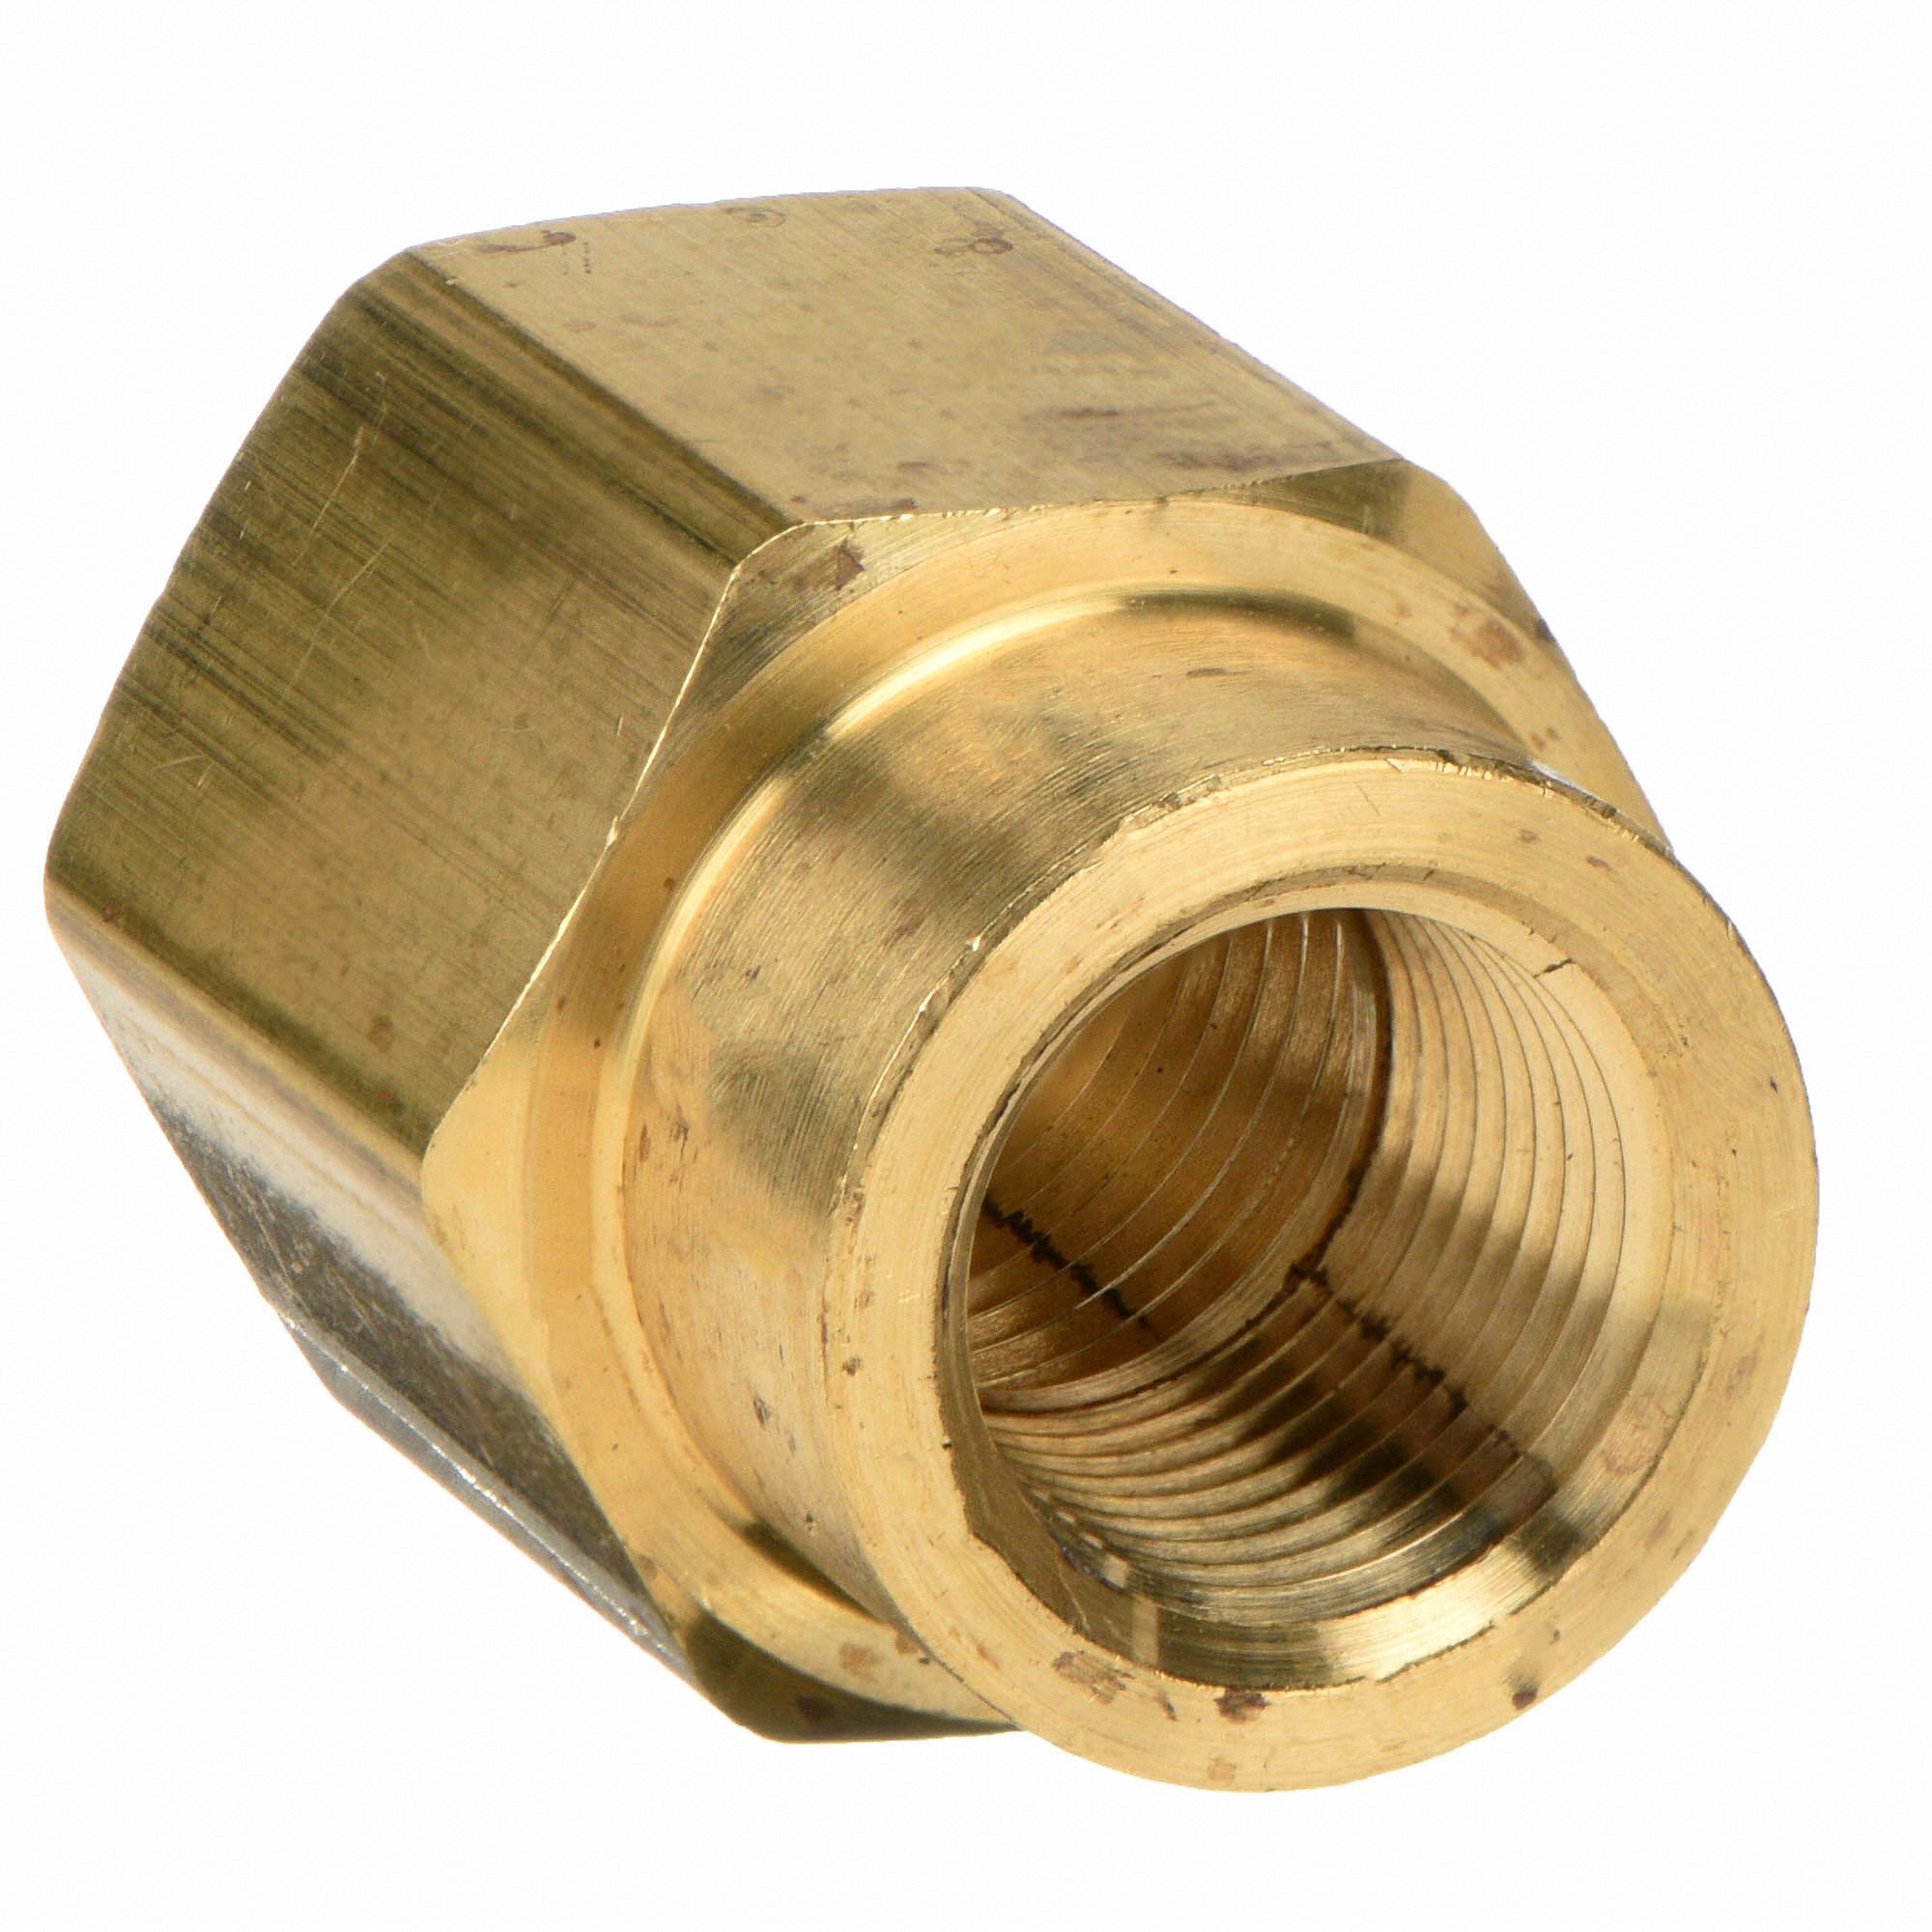 5 Pk Details about  / Automation Direct NITRA PNEUMATICS Hex Head Plug 3//8NPT BFHHP-38N